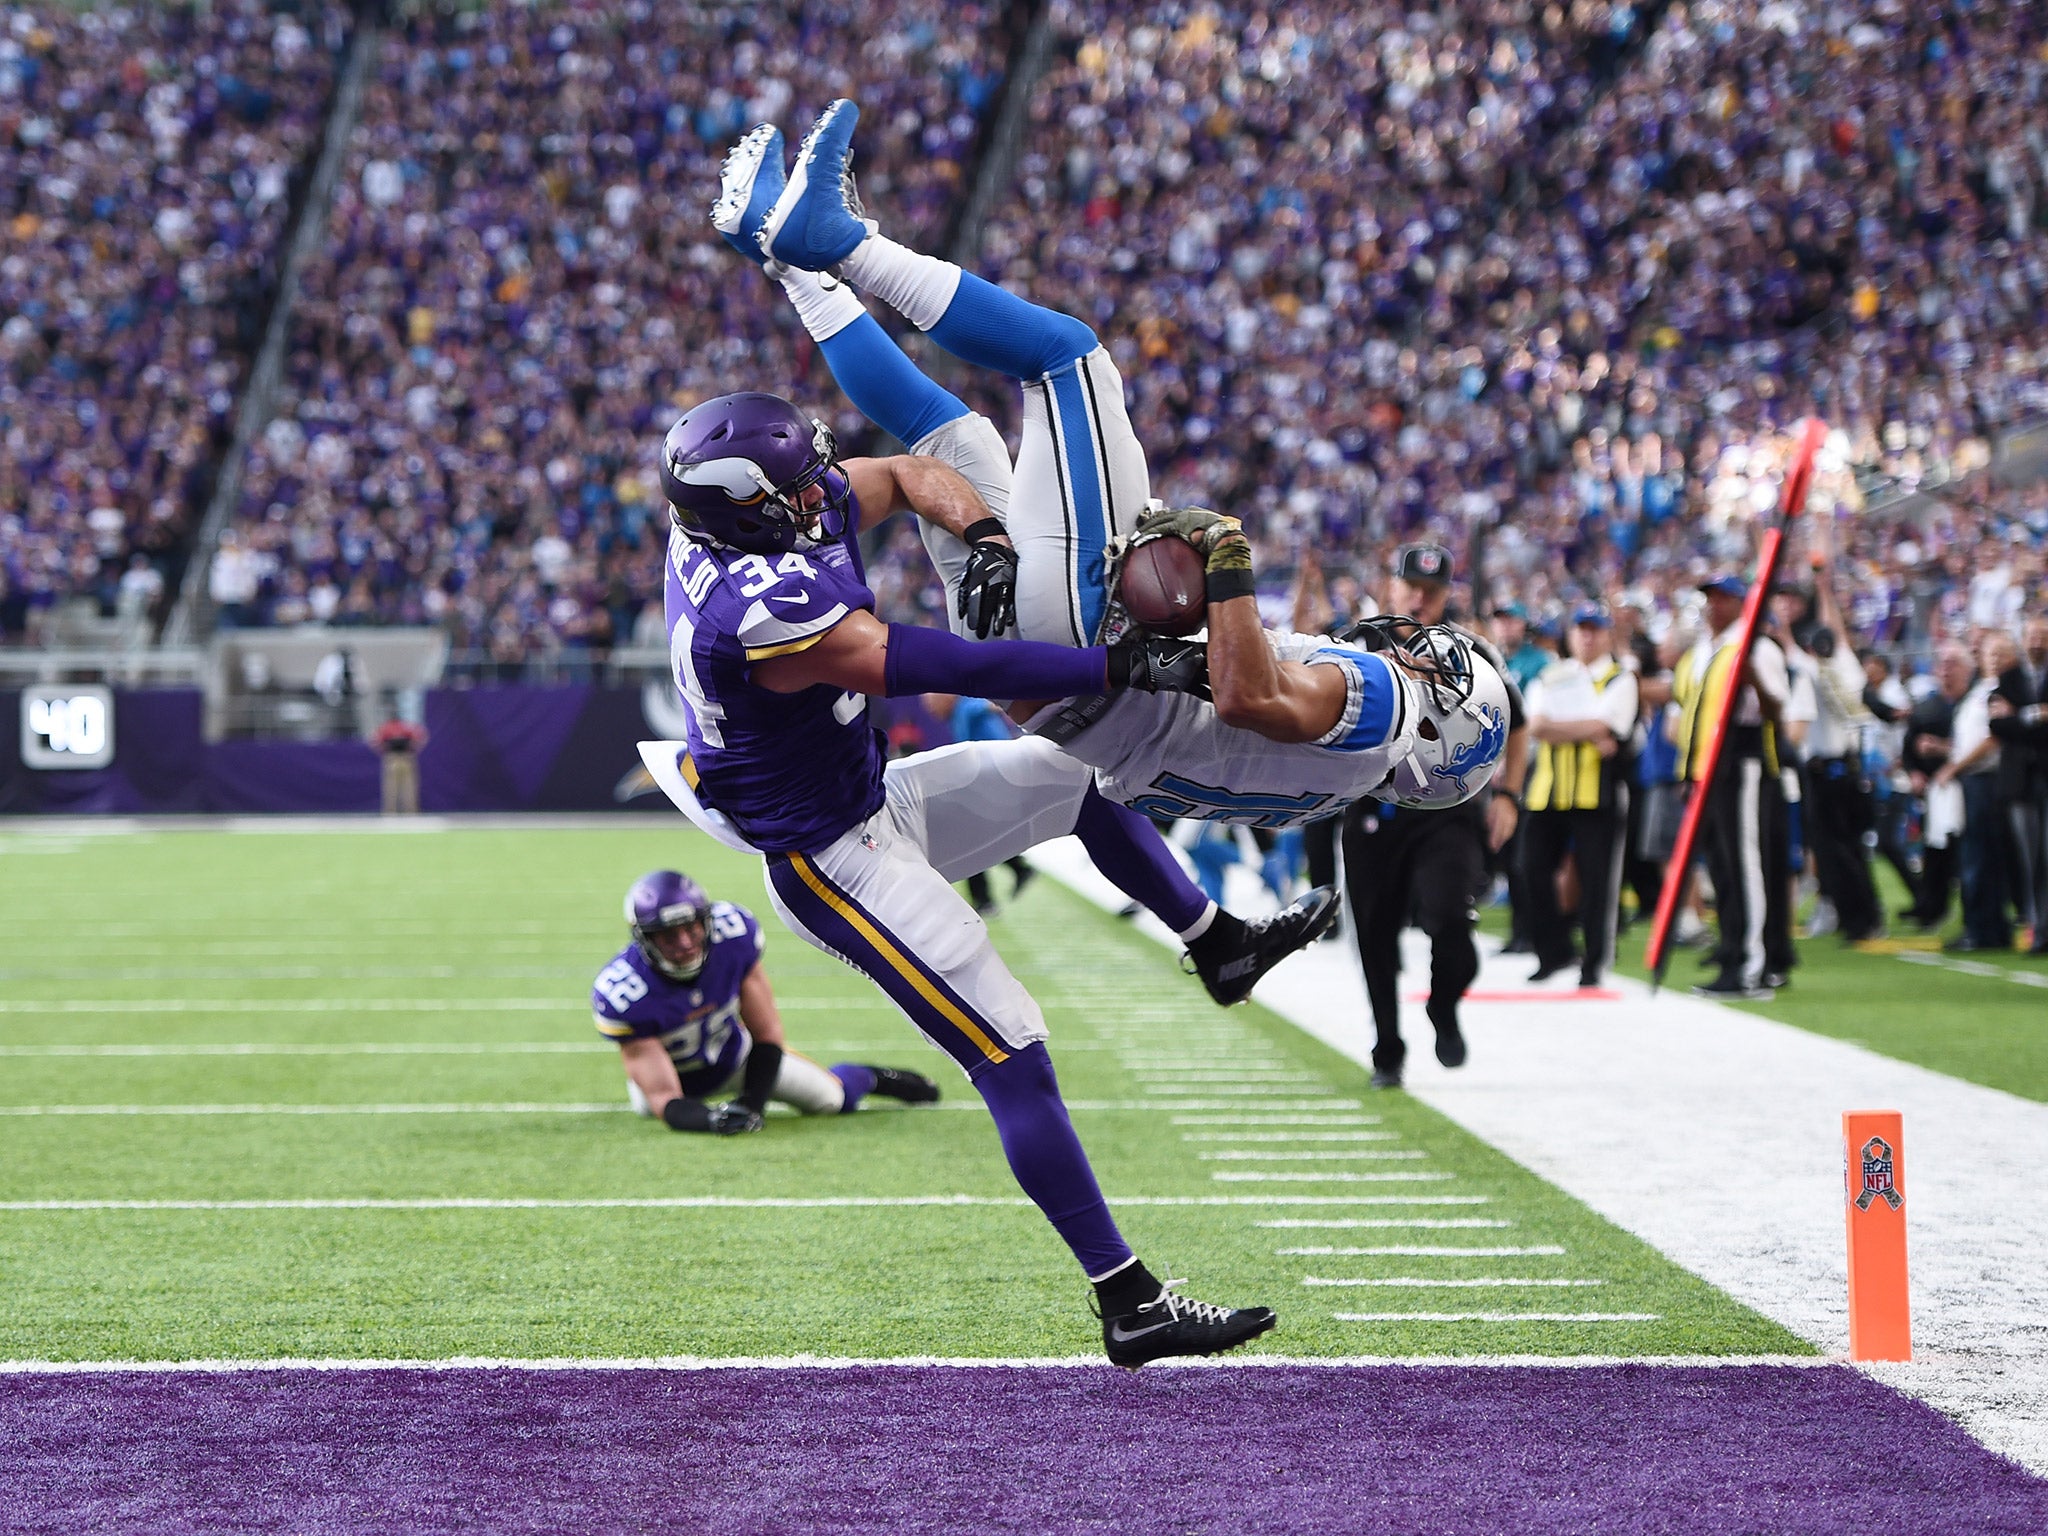 Golden Tate flips into the end zone to score the winning touchdown for the Detroit Lions